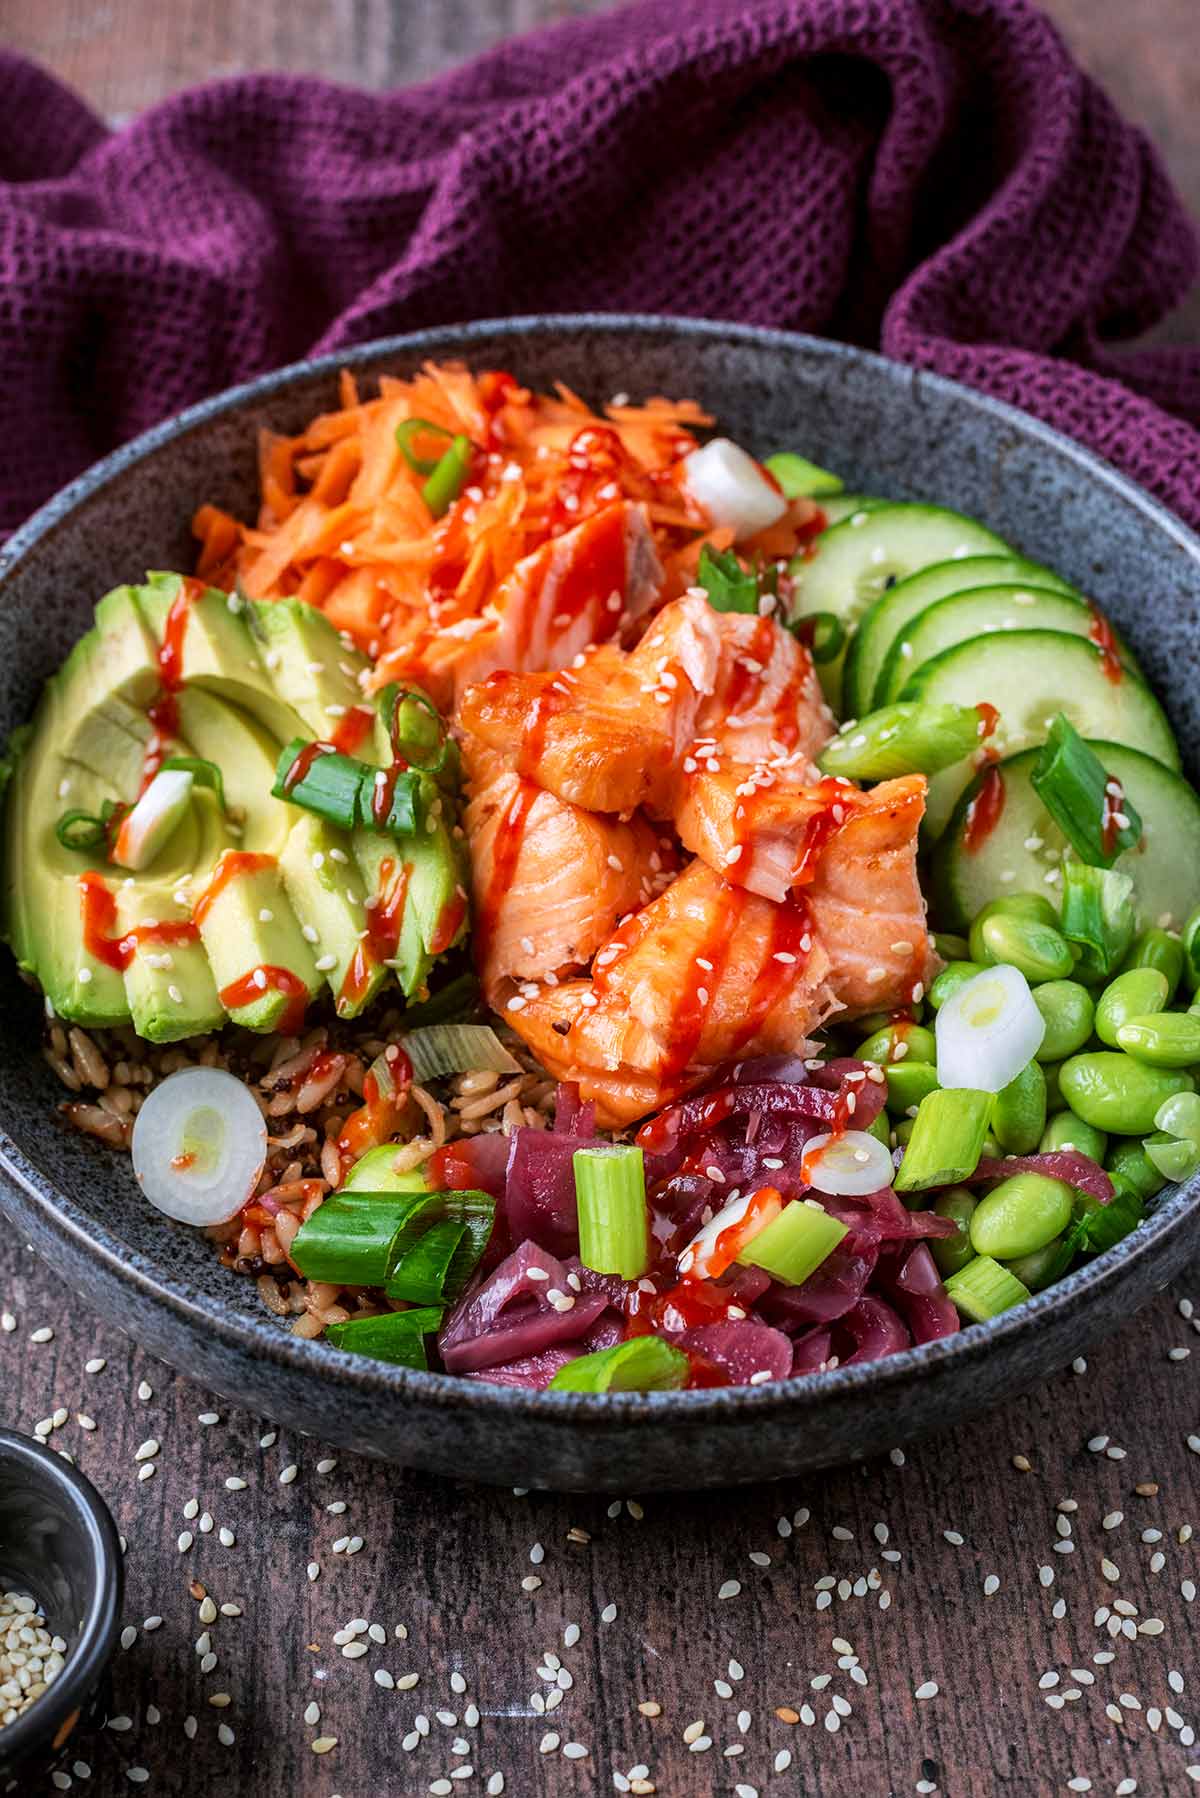 A bowl of salmon, rice and salad vegetables.